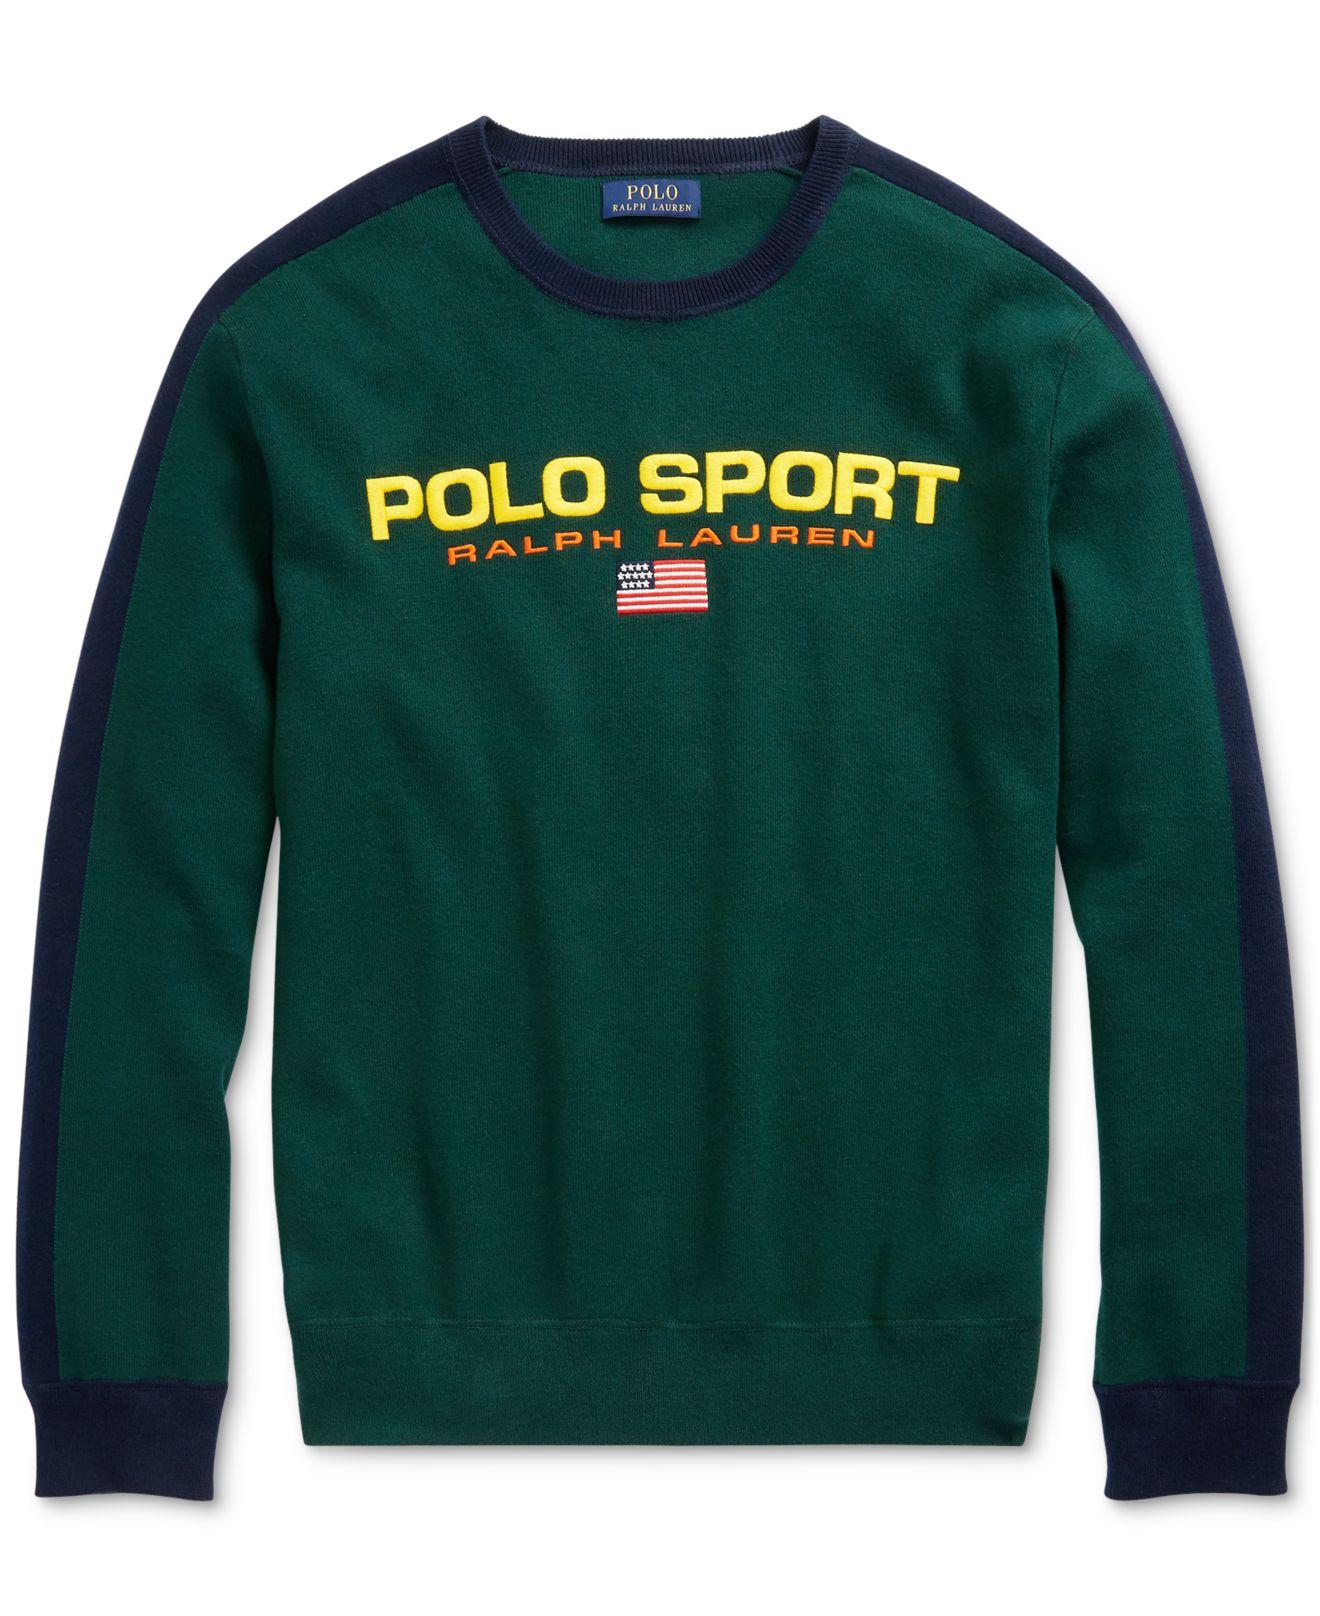 Polo Ralph Lauren Polo Sport Cotton Jumper in Forest (Green) for 